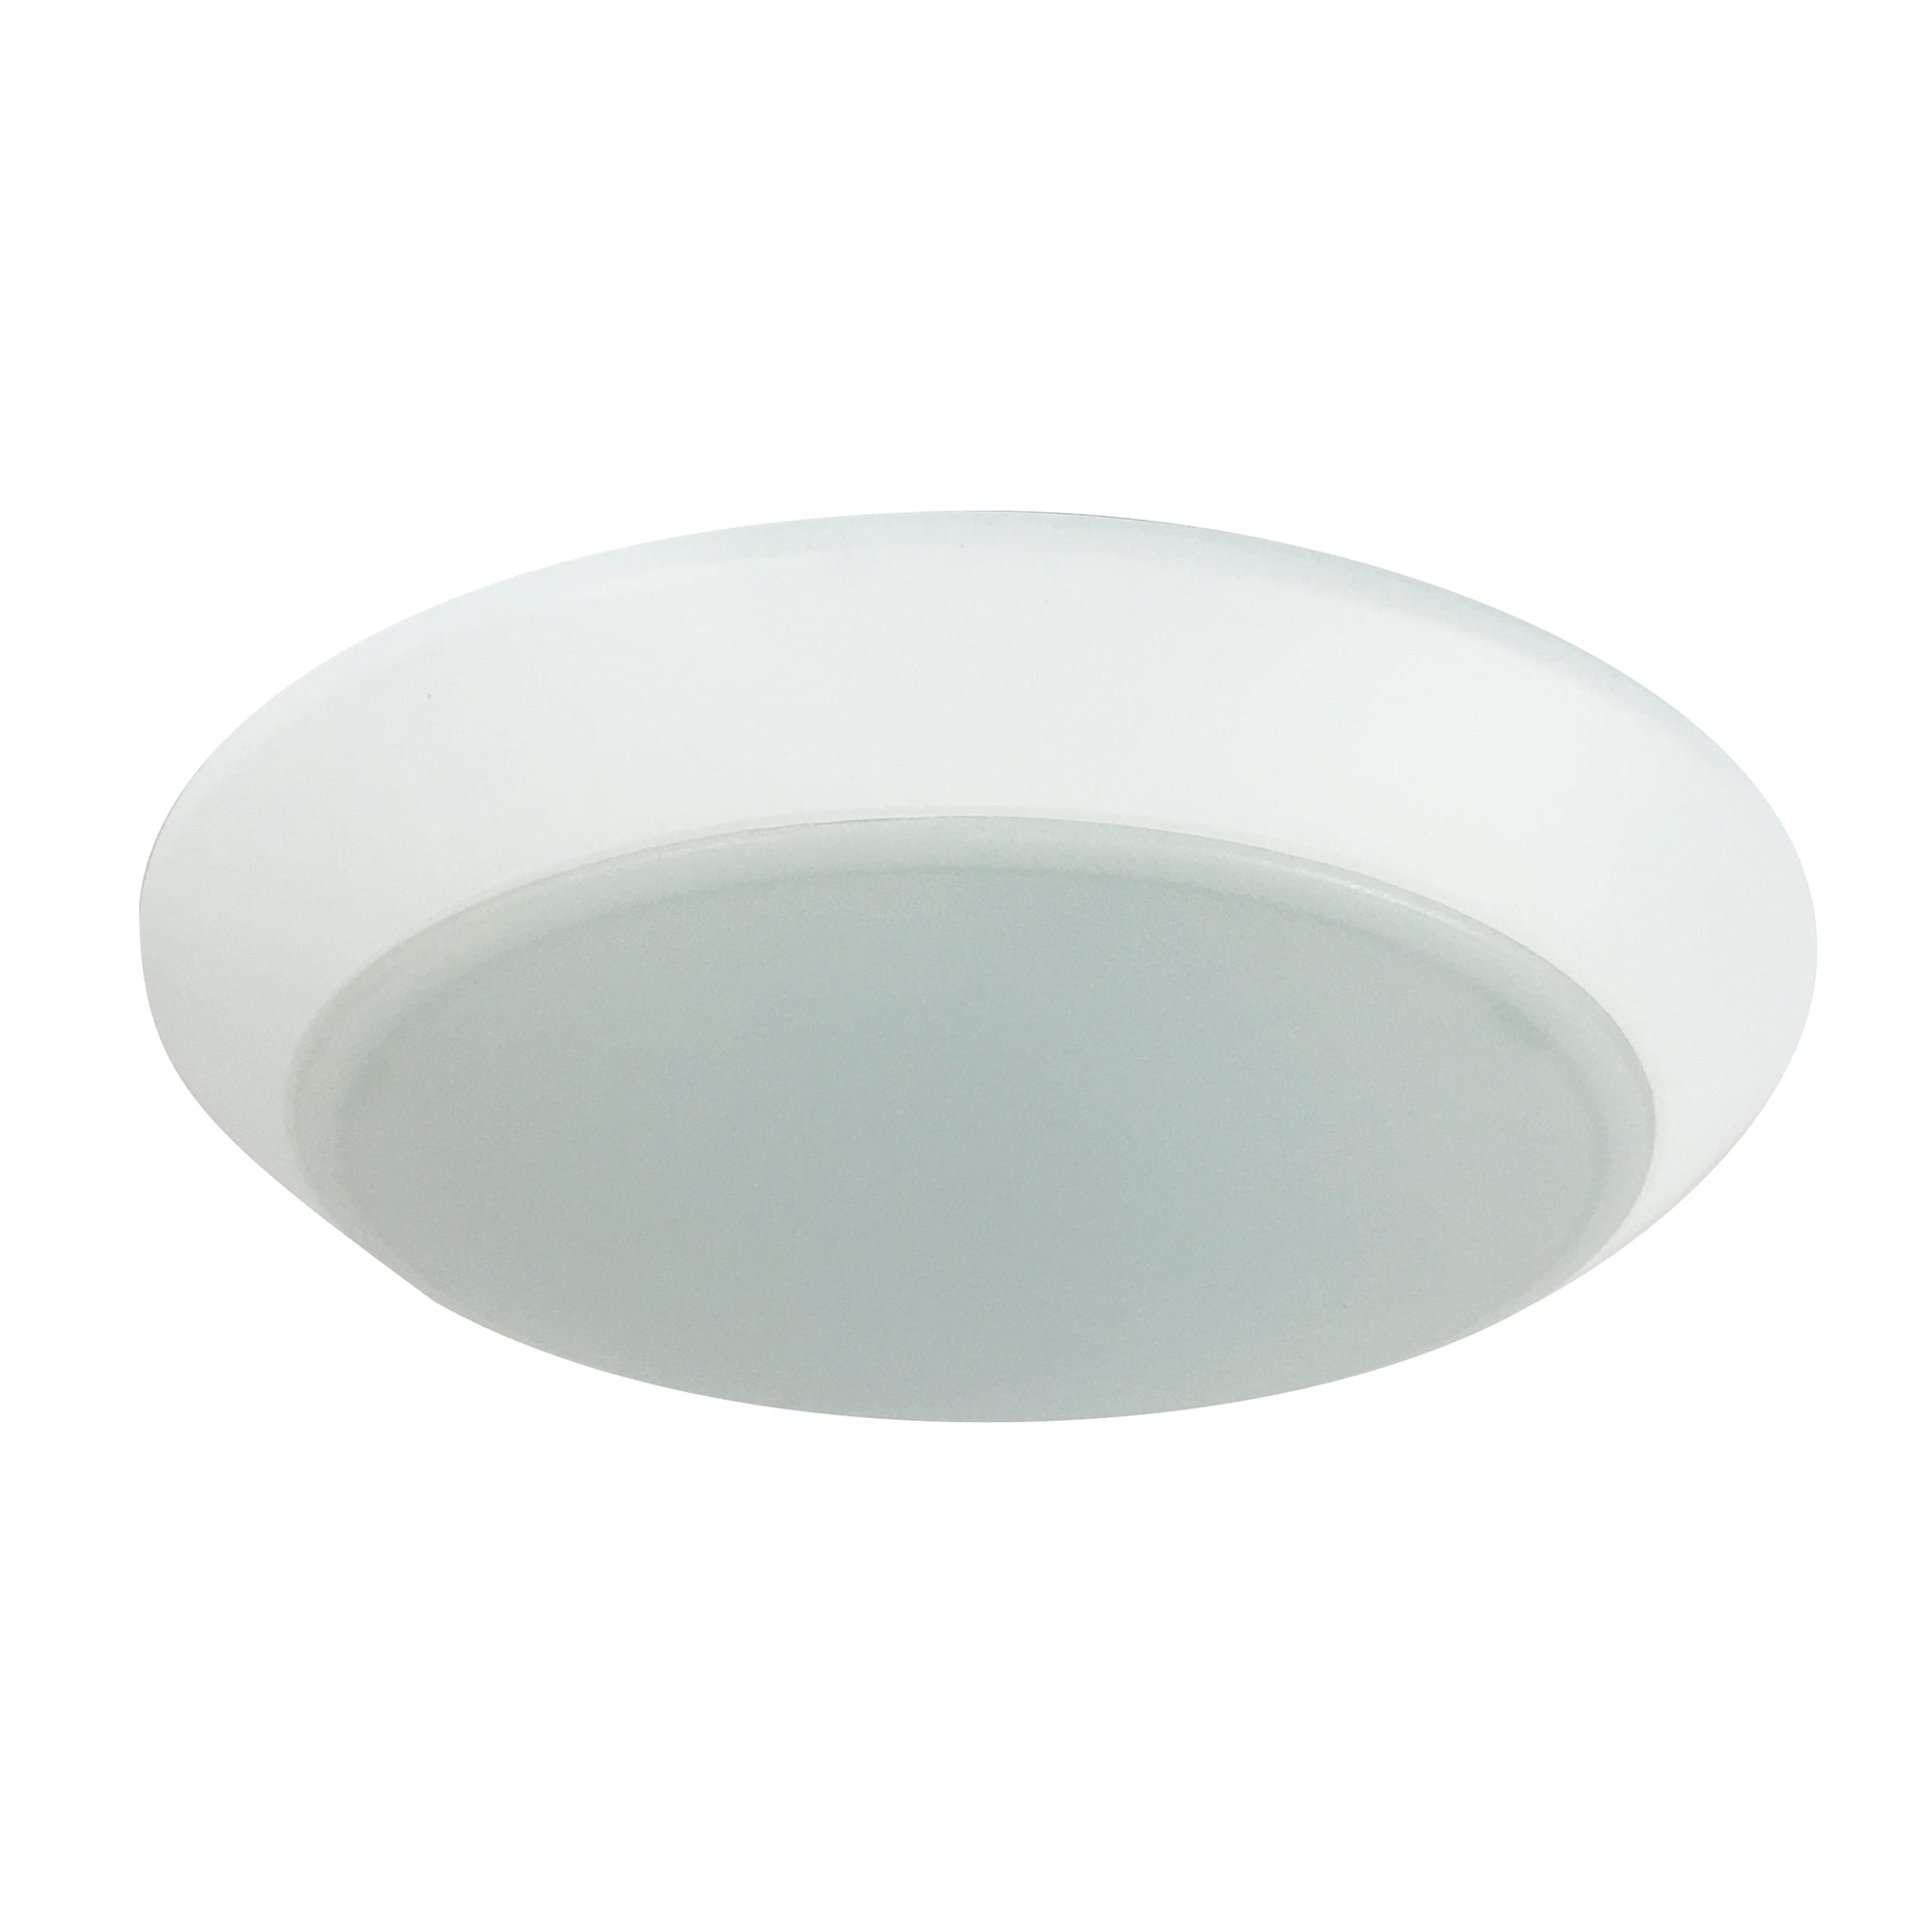 Nora Lighting NLOPAC-R8T2440W - Surface - 8 Inch AC Opal LED Surface Mount, 2150lm / 32W, 4000K, White finish